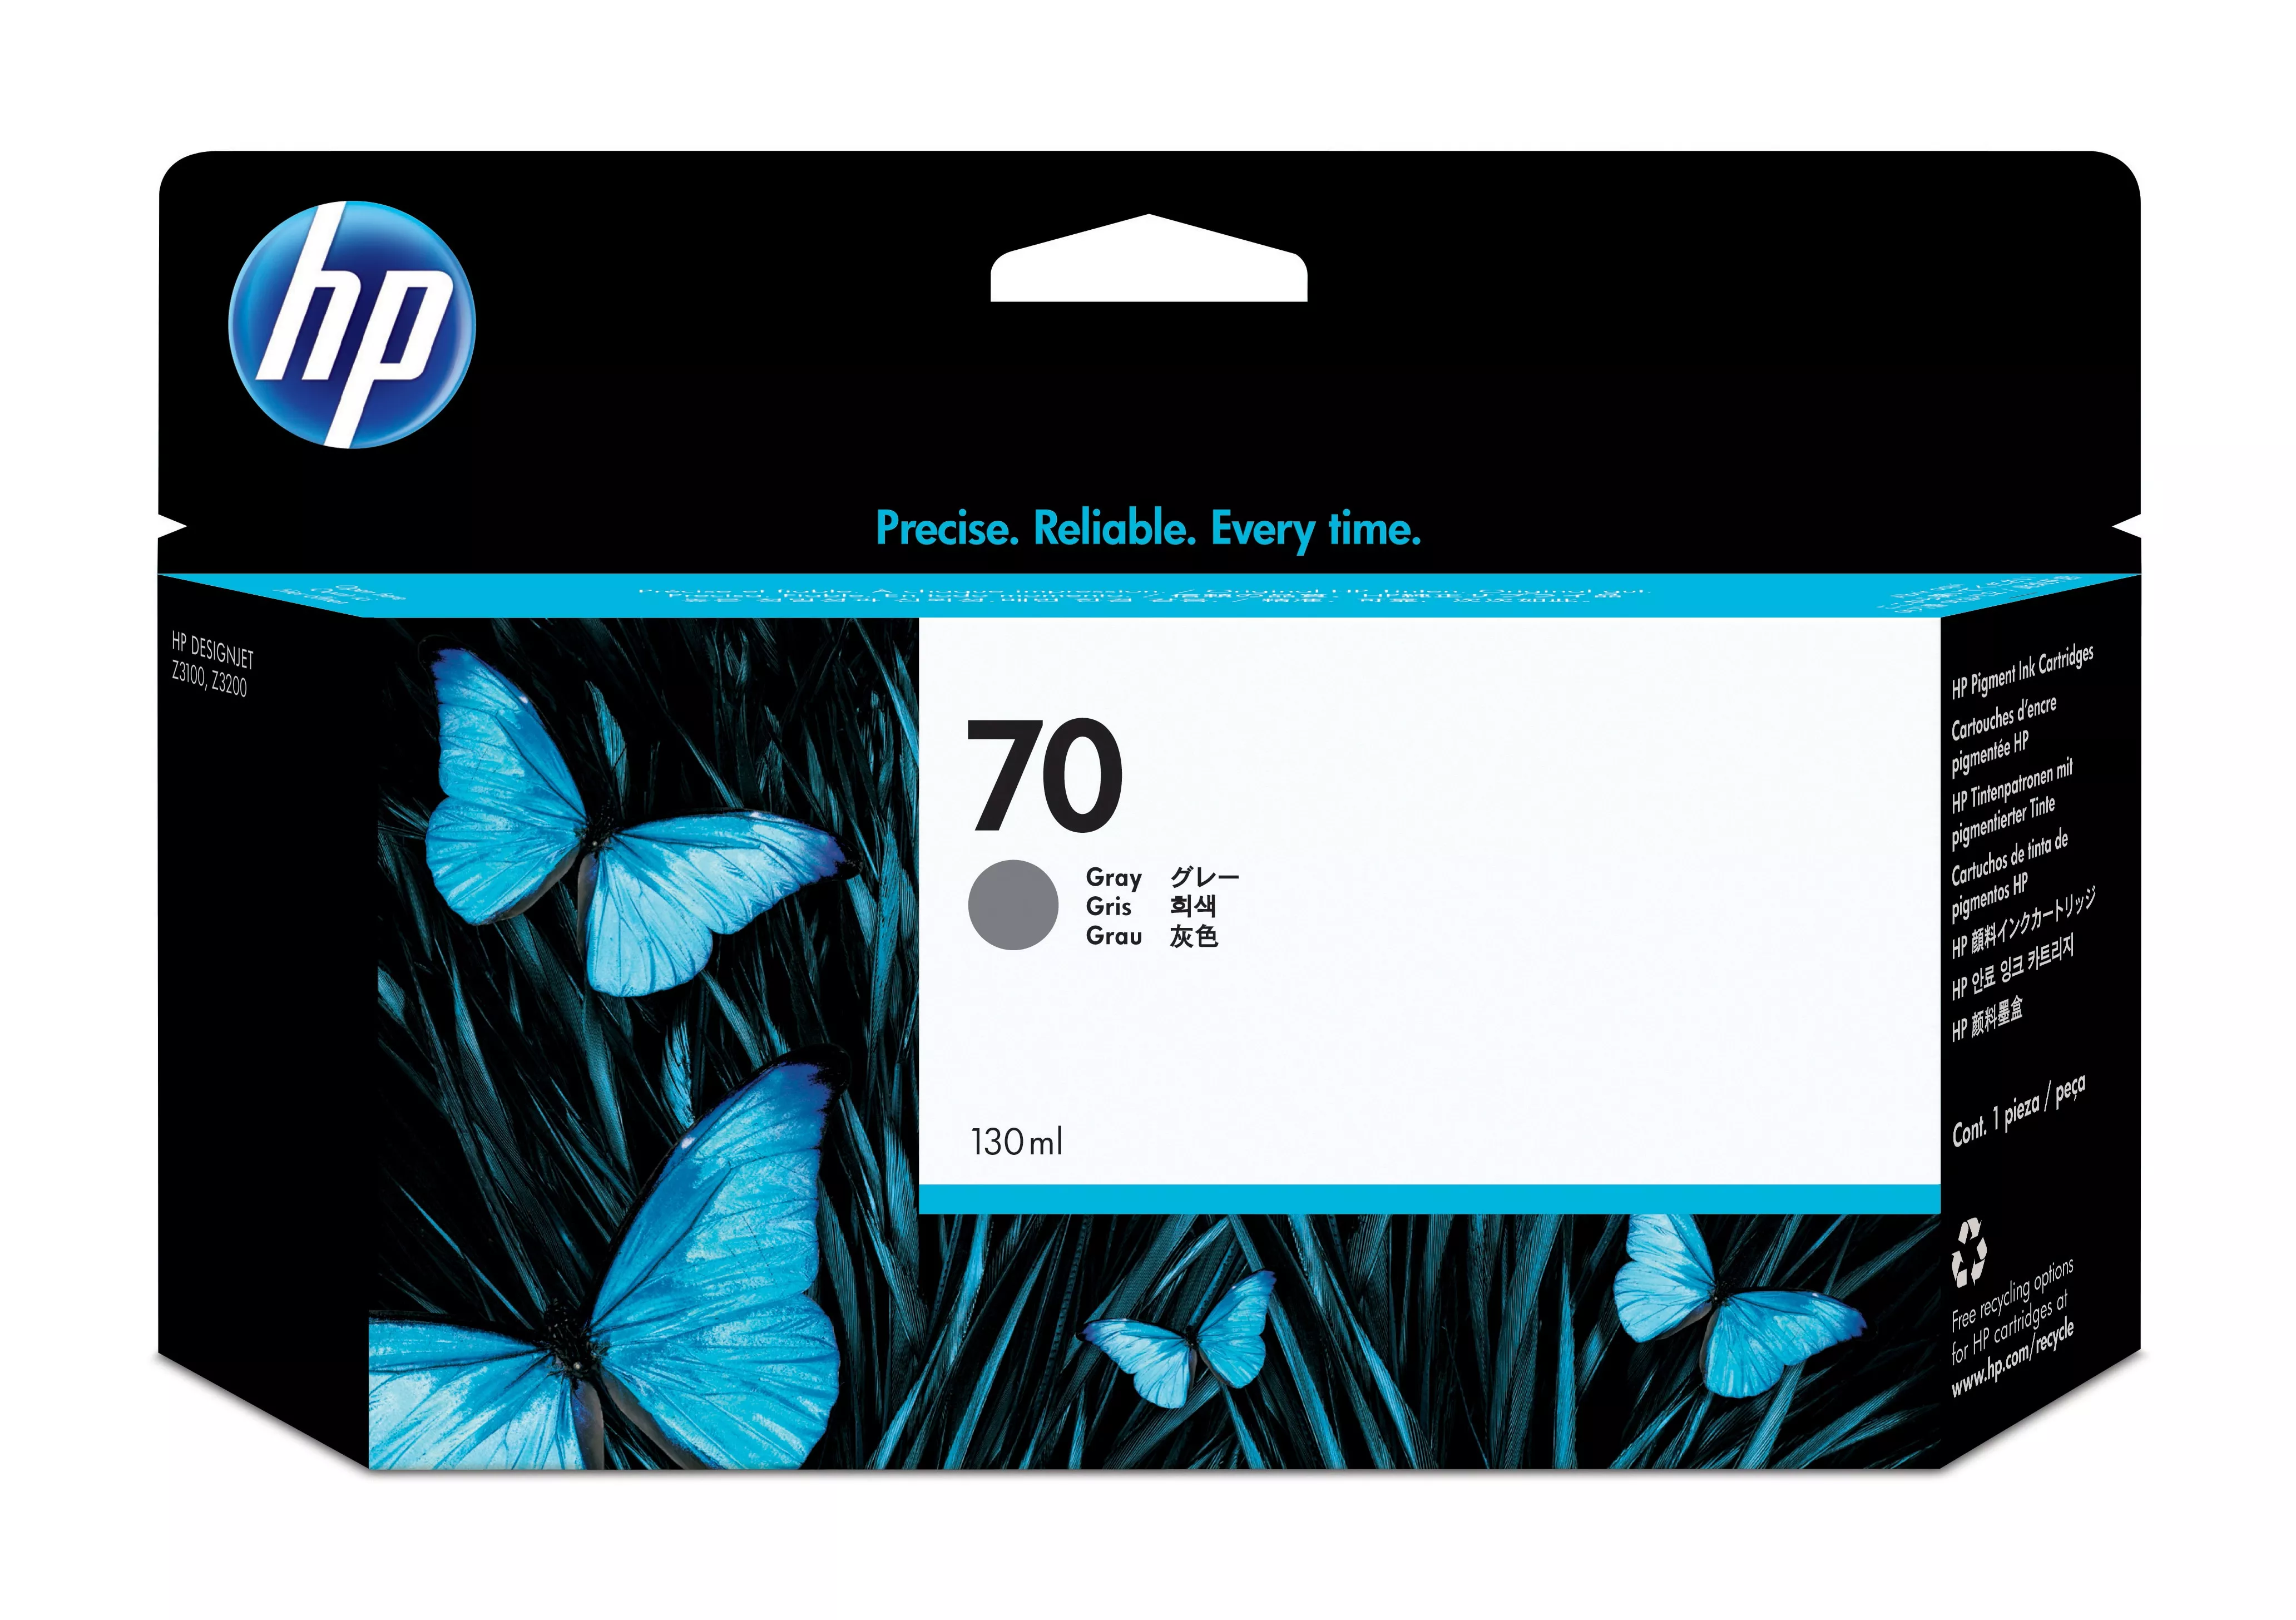 Vente Autres consommables HP 70 original Ink cartridge C9450A grey standard capacity